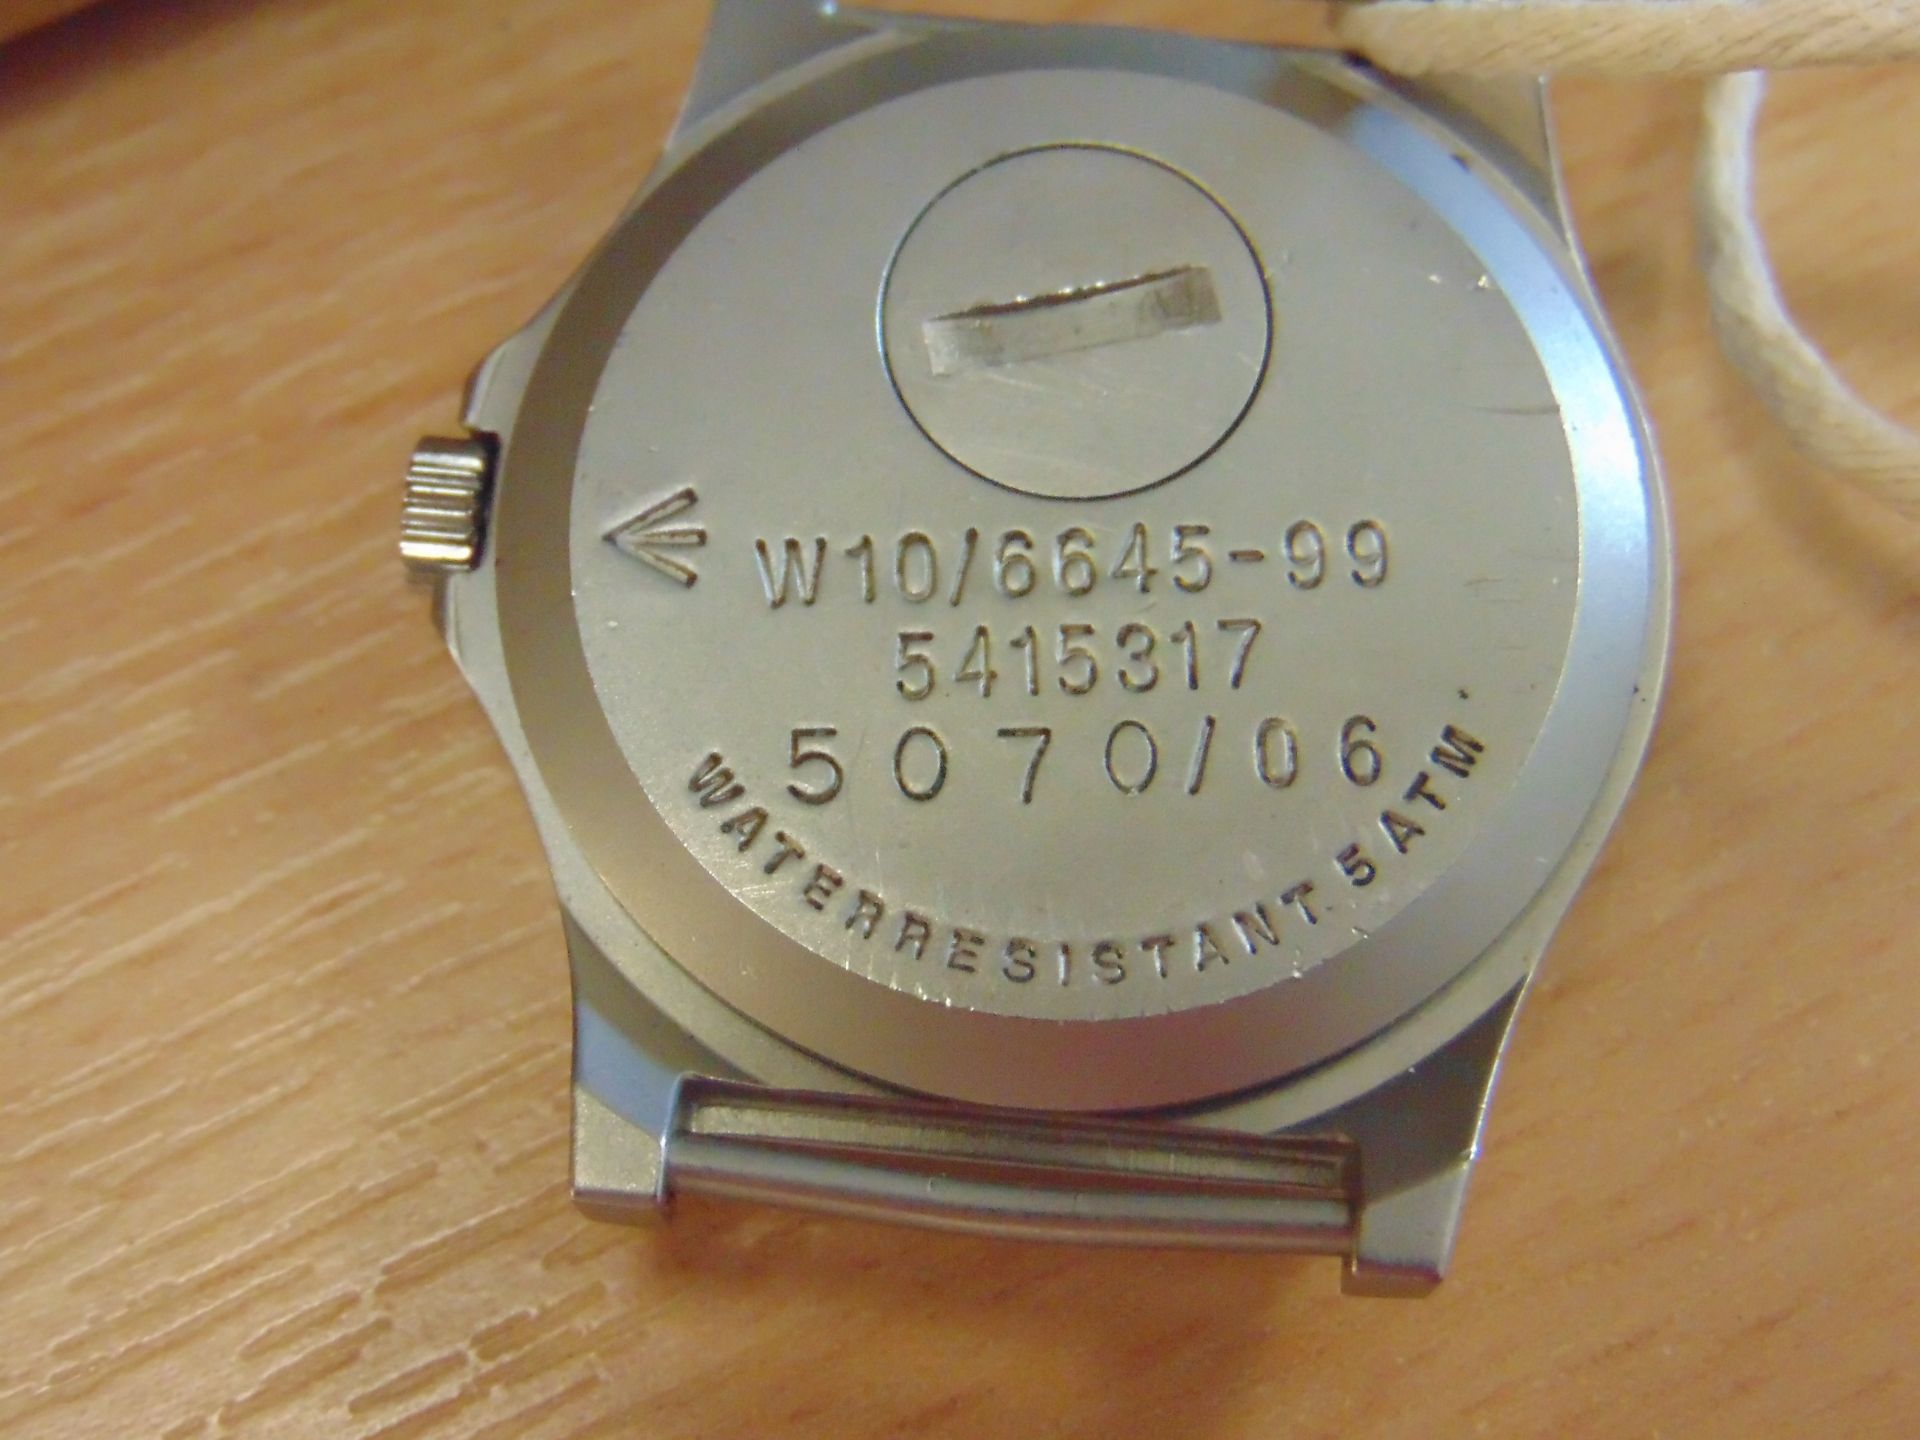 CWC W10 BRITISH ARMY SERVICE WATCH NATO MARKS DATE 2006 WATER RESISTANT TO 5 ATM - Image 3 of 5